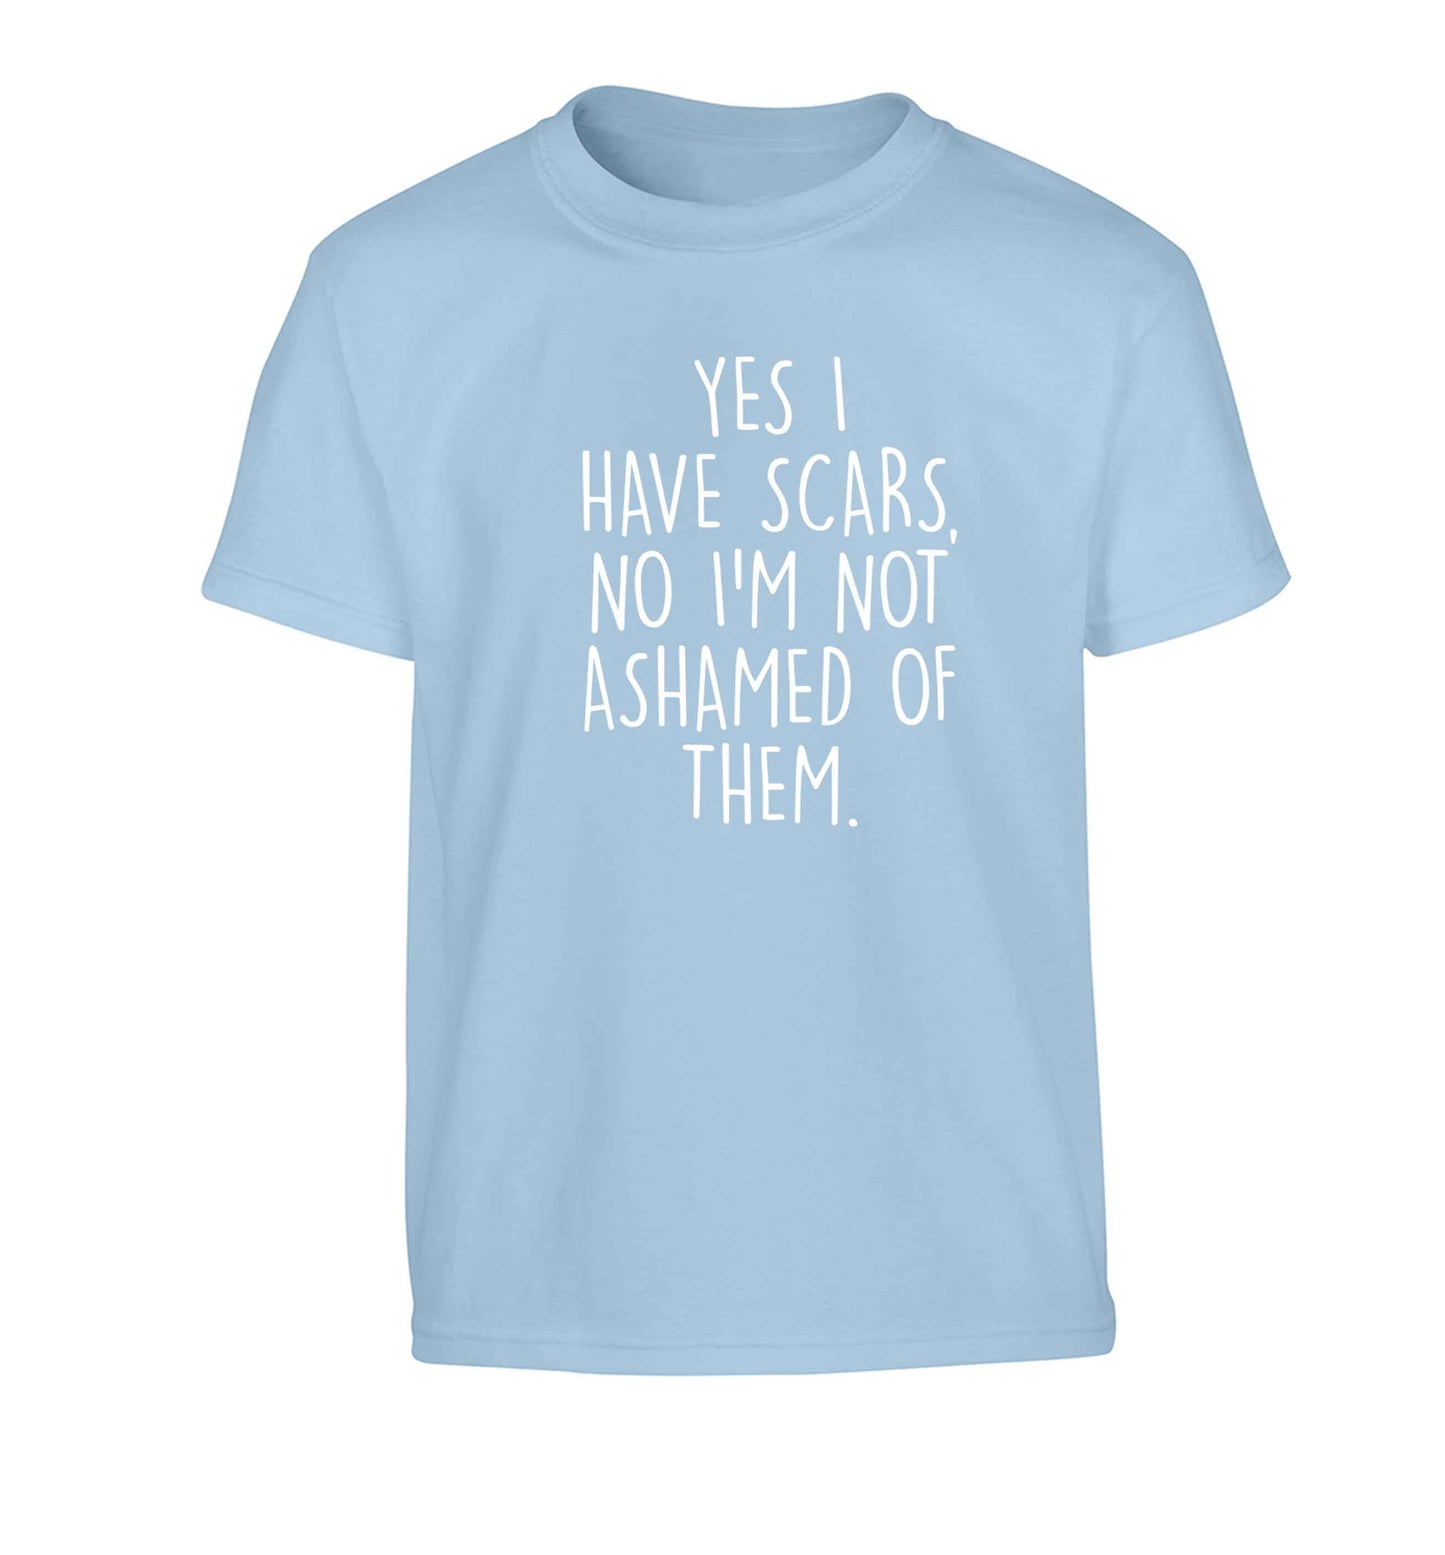 Yes I have scars, no I'm not ashamed of them Children's light blue Tshirt 12-13 Years